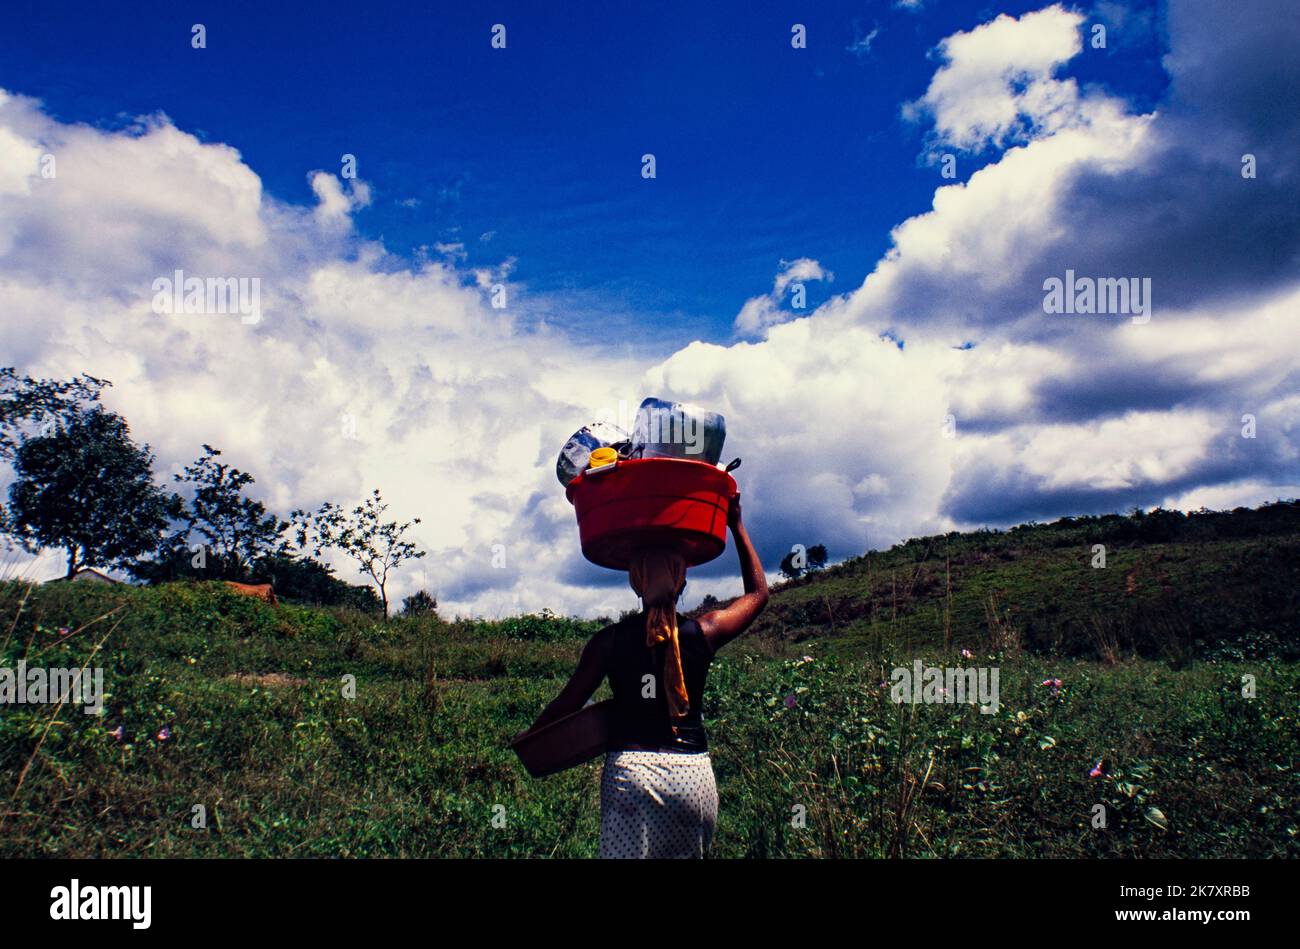 Daily life in countryside Northeastern Brazil, young black woman takes the dishes to be washed in the river. Palmares, Pernambuco State. Stock Photo